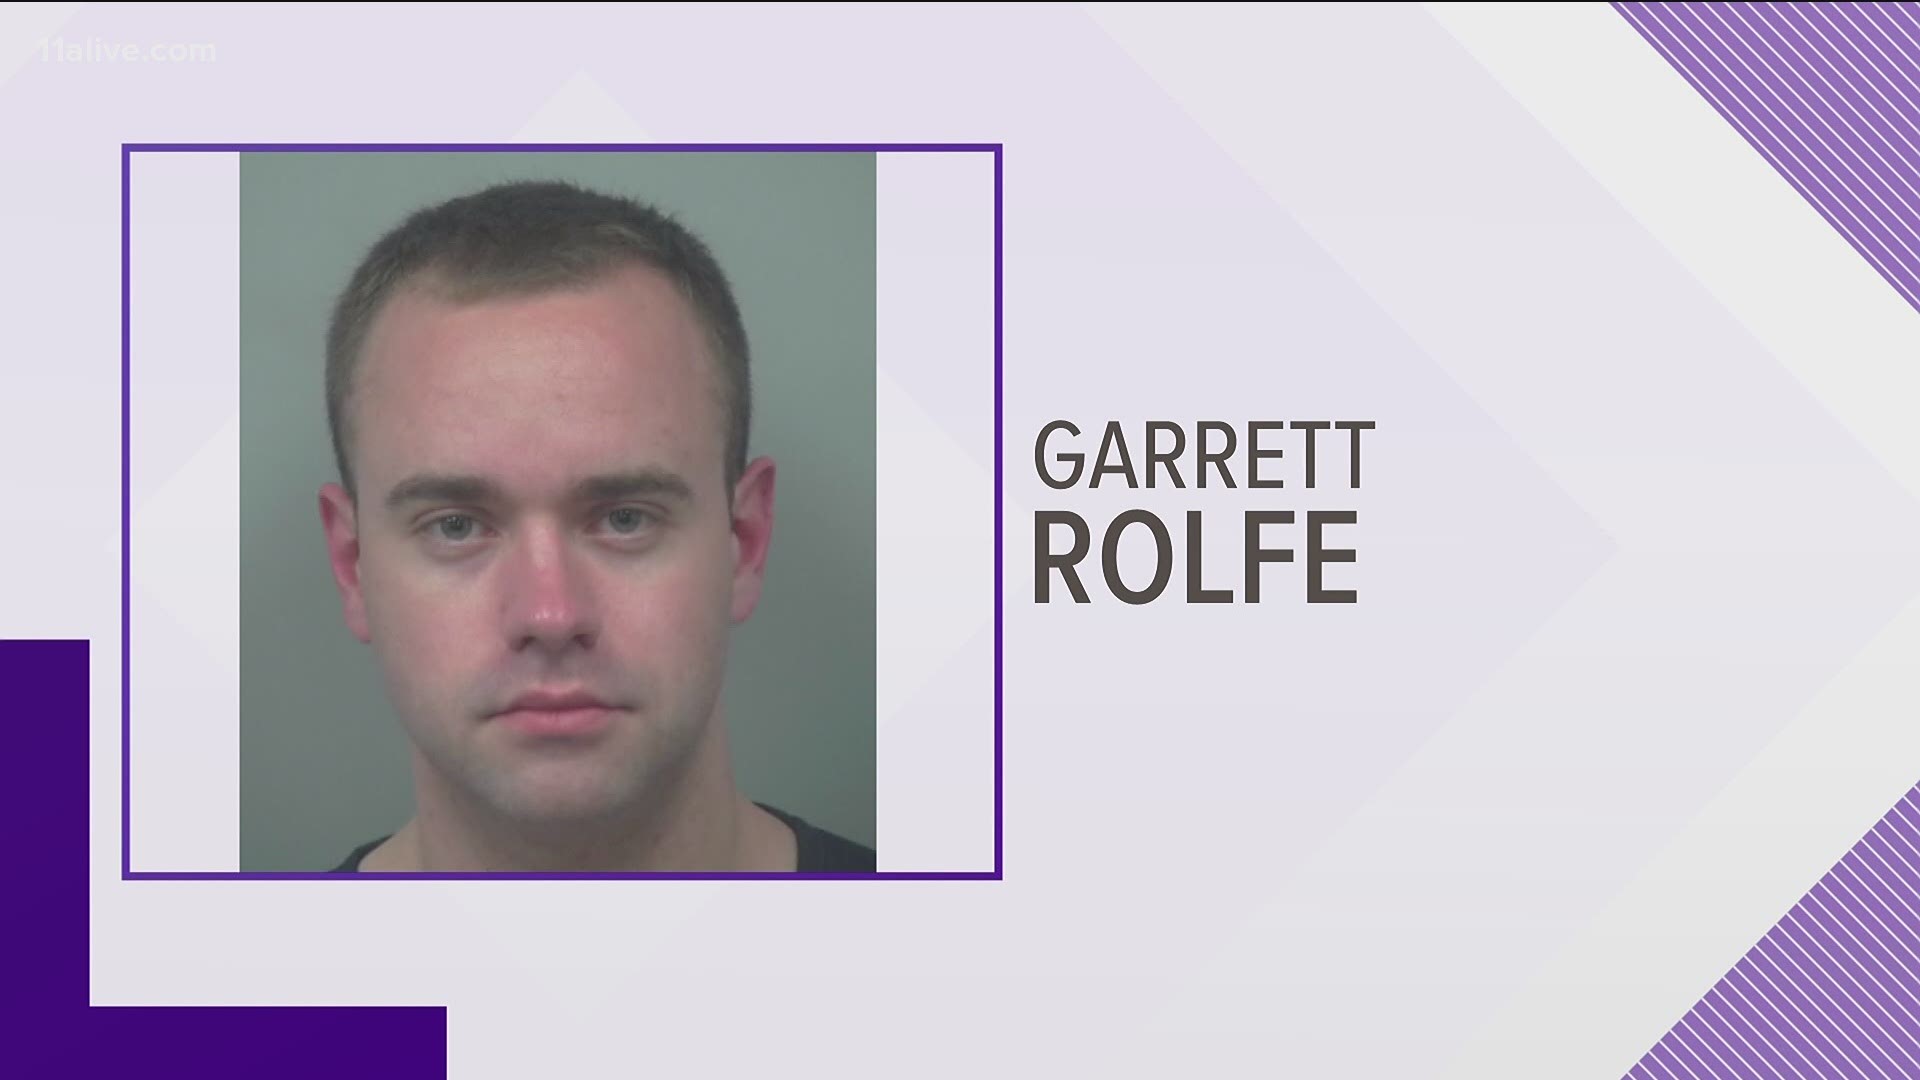 Garrett Rolfe, the fired Atlanta Police officer who shot and killed Rayshard Brooks last summer, has been reinstated by the Atlanta Civil Service Board.